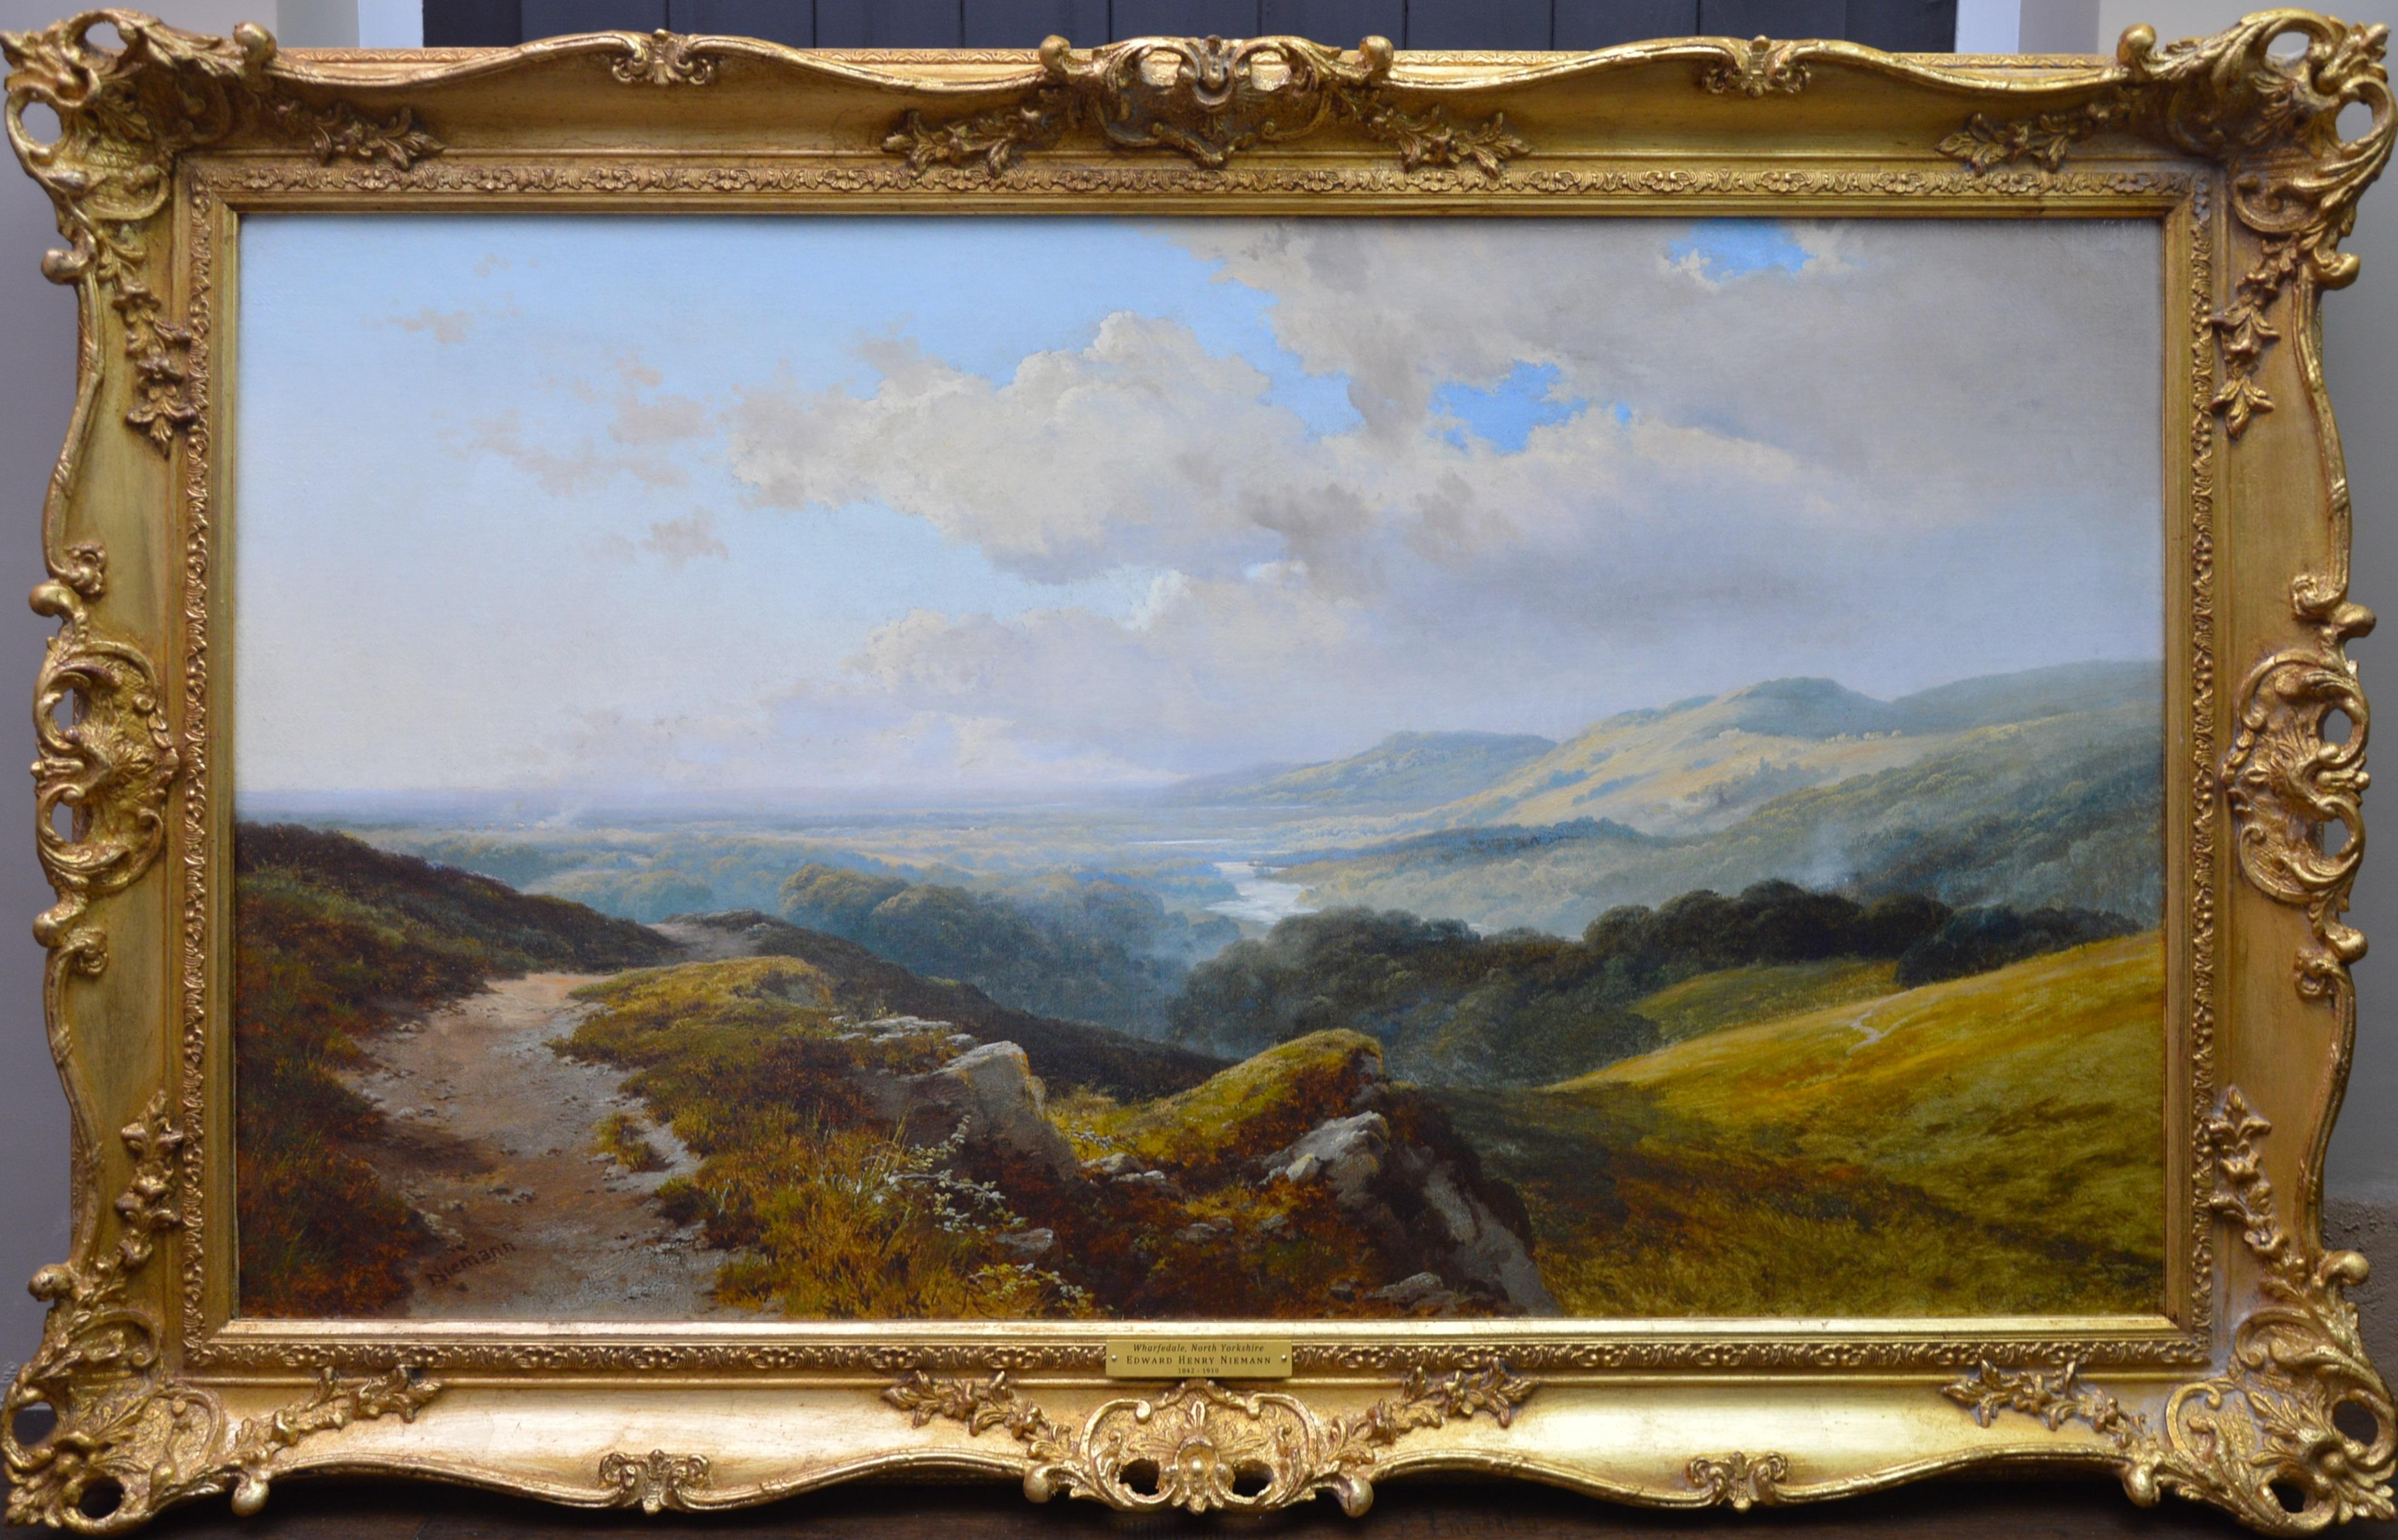 Edward H. Niemann Landscape Painting - Wharfedale - 19th Century English Landscape Oil Painting of Yorkshire Dales 